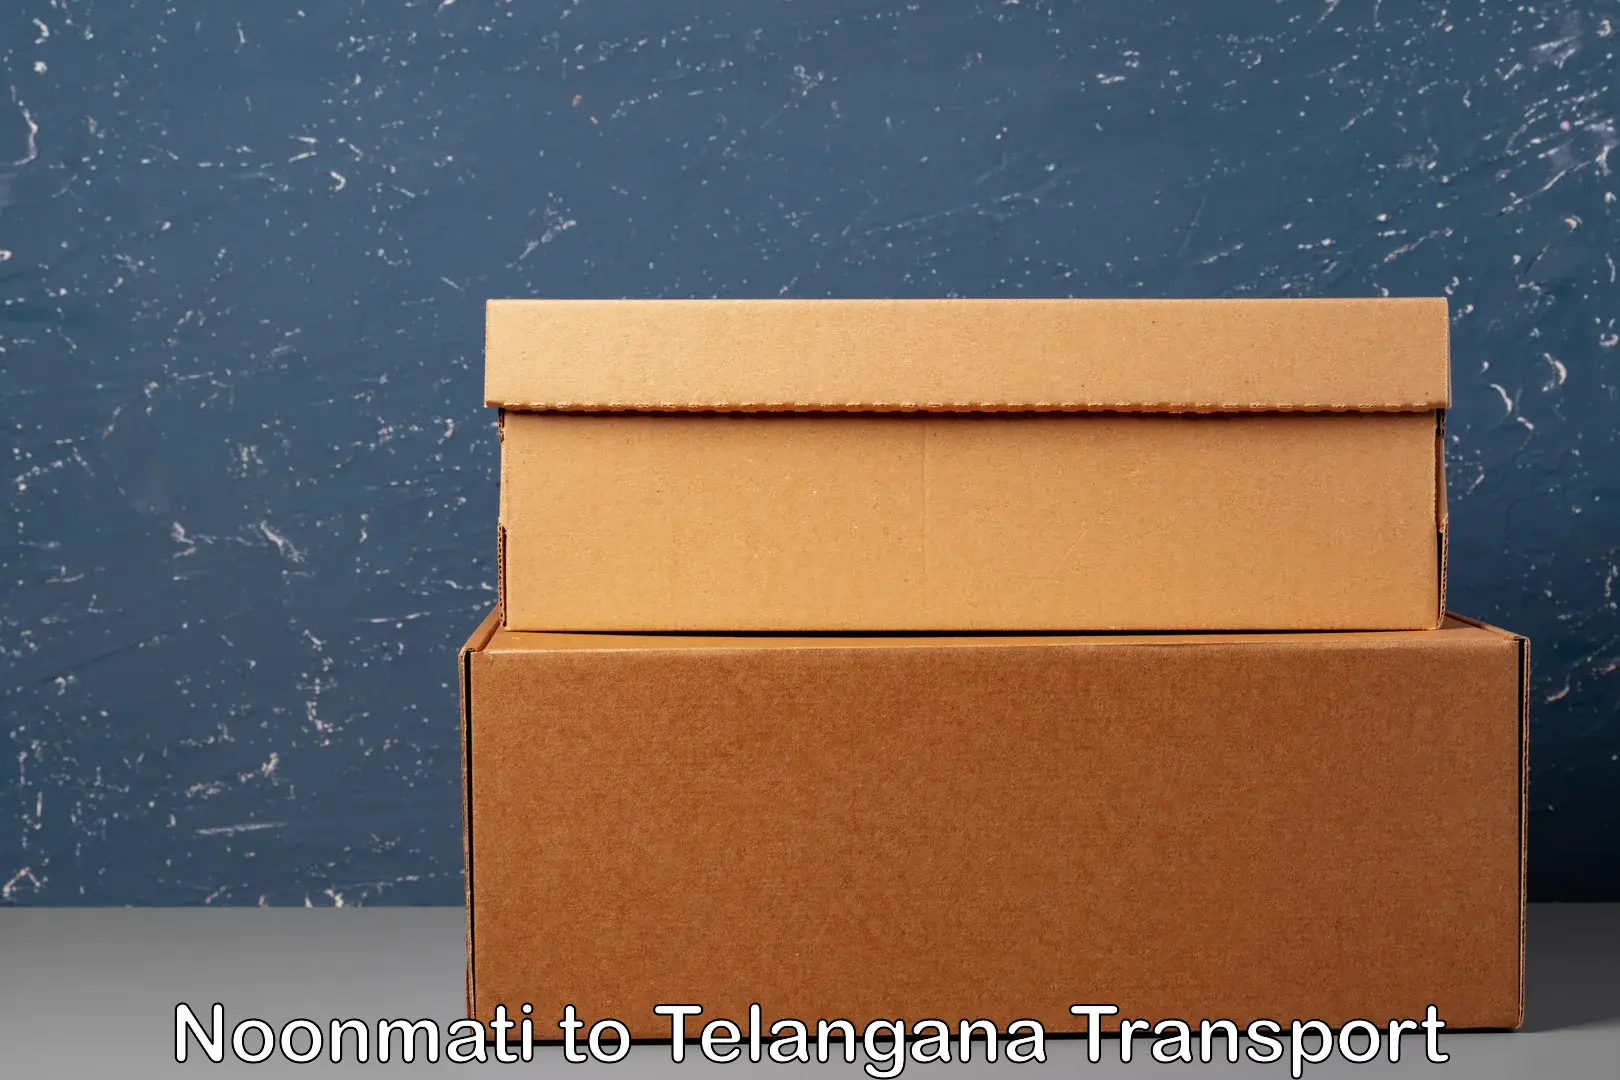 Road transport online services in Noonmati to Hyderabad